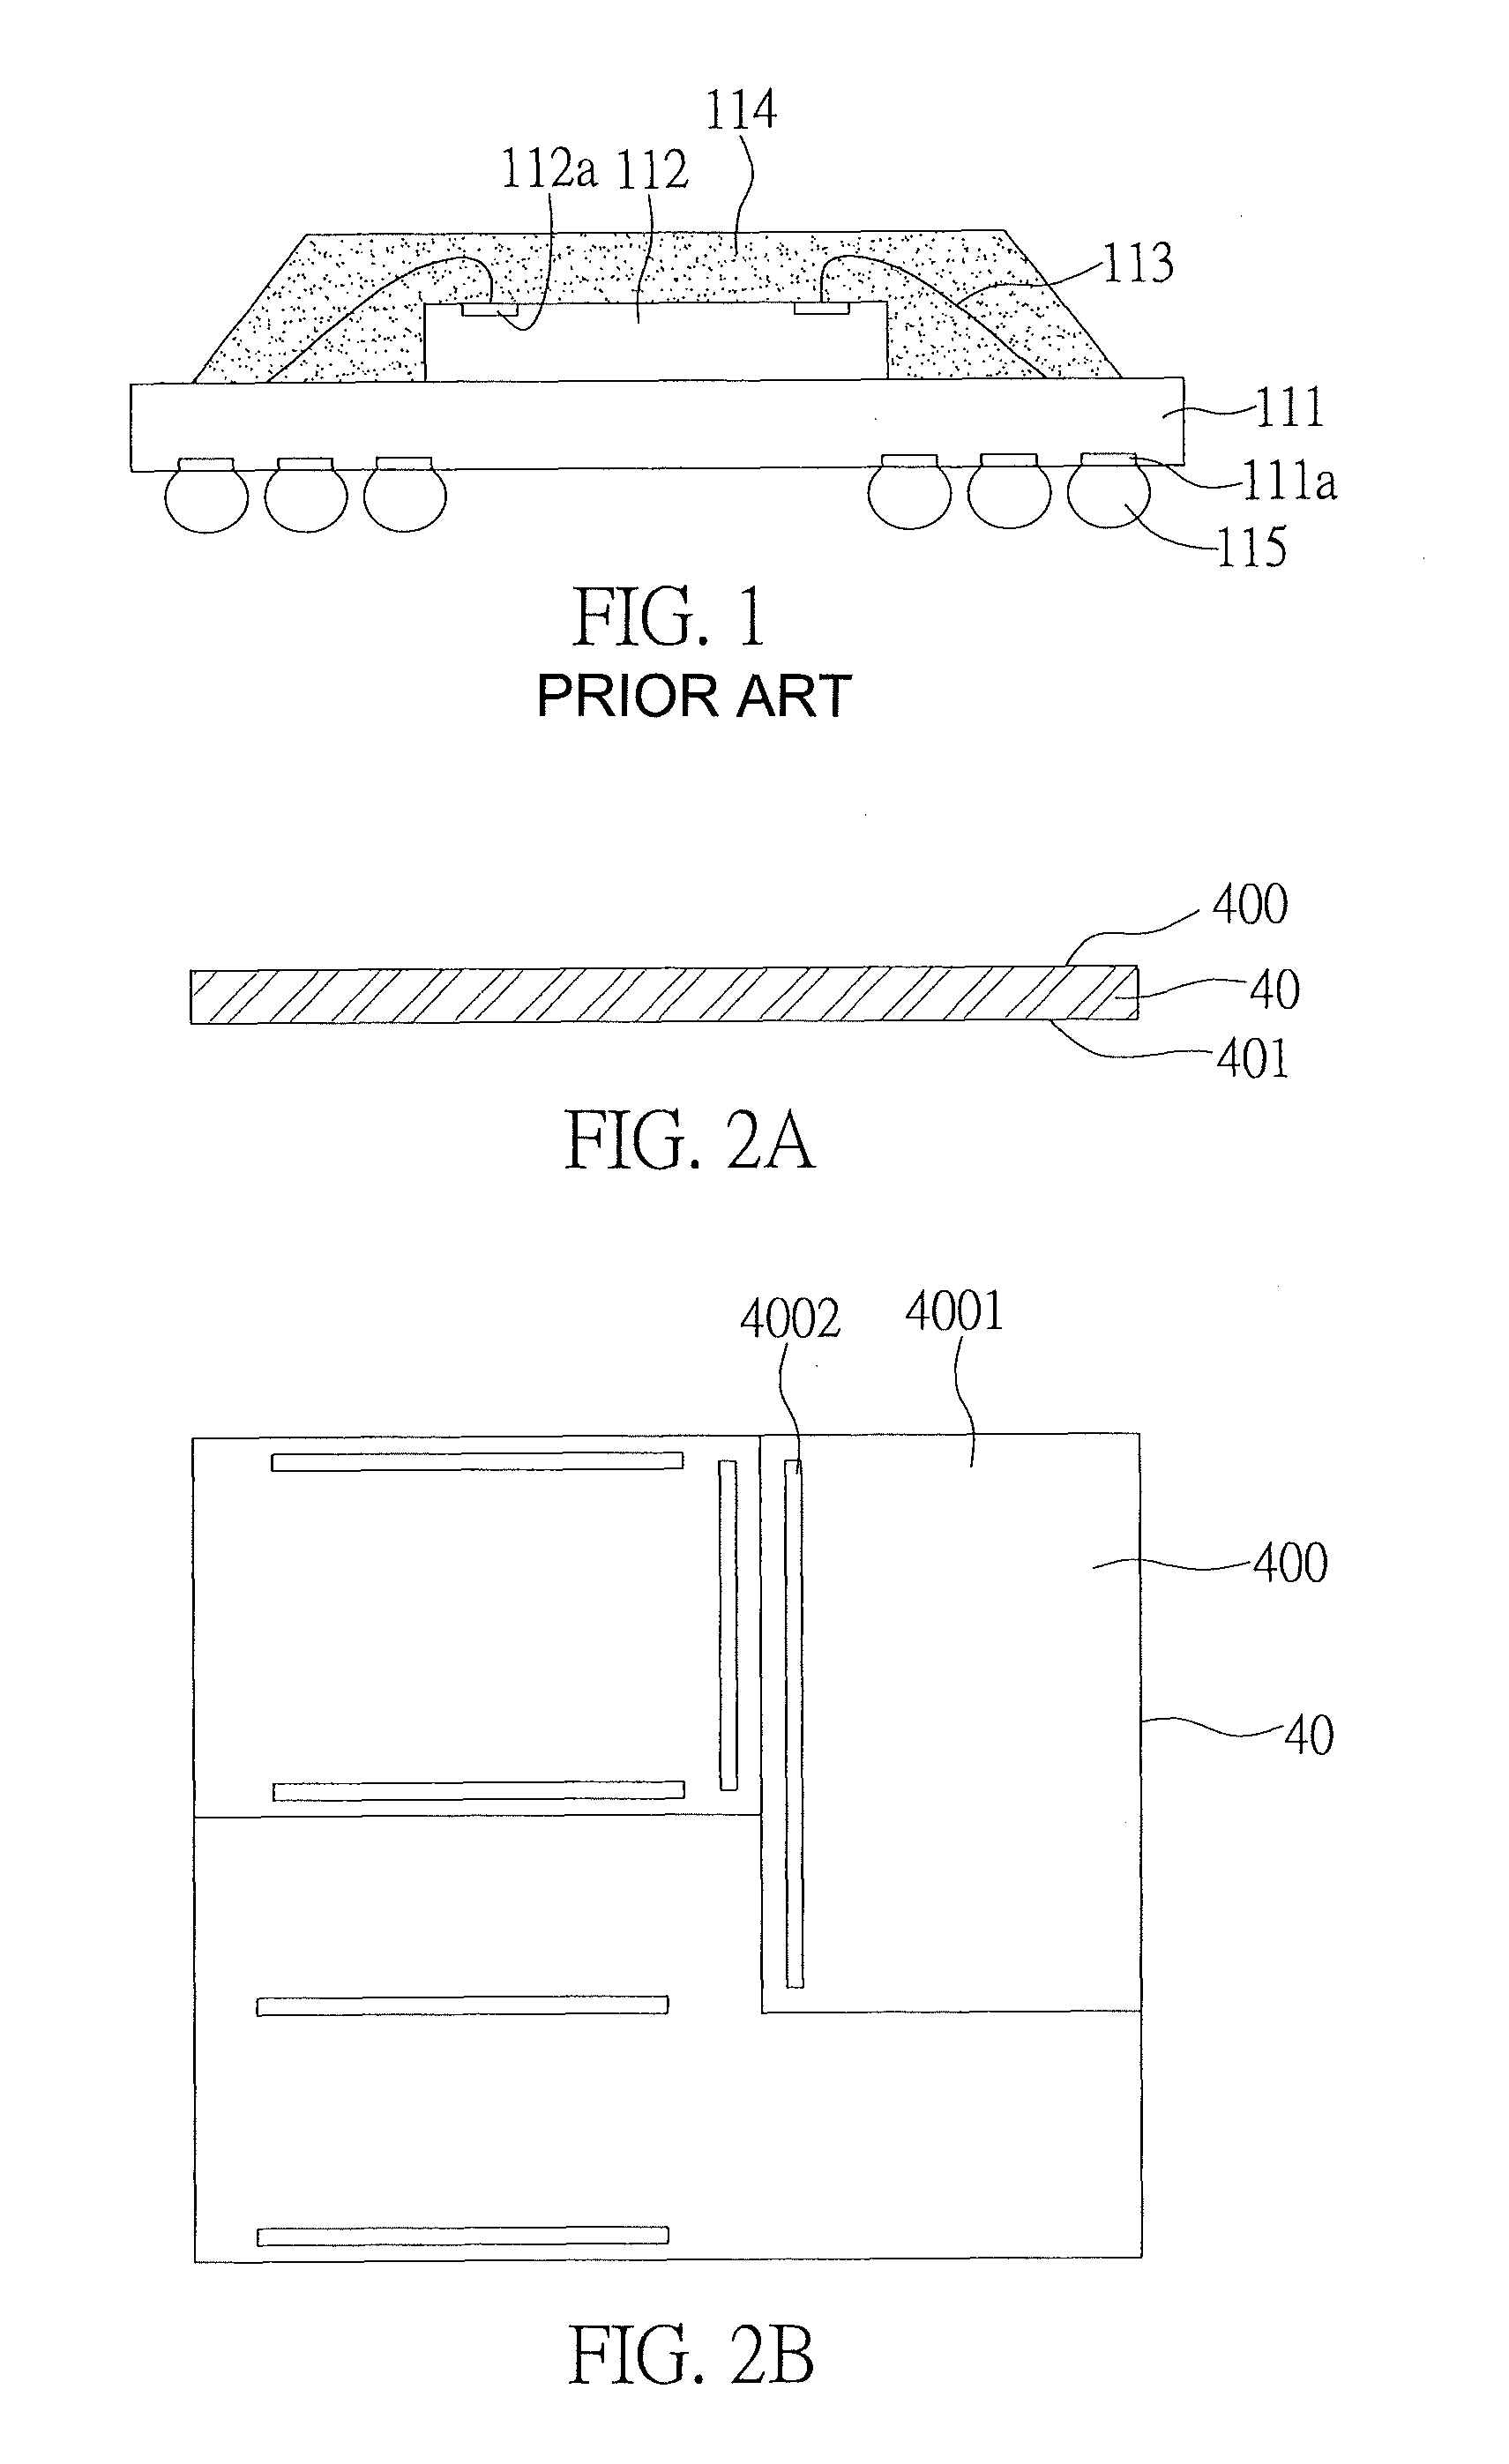 Multi-substrate region-based package and method for fabricating the same